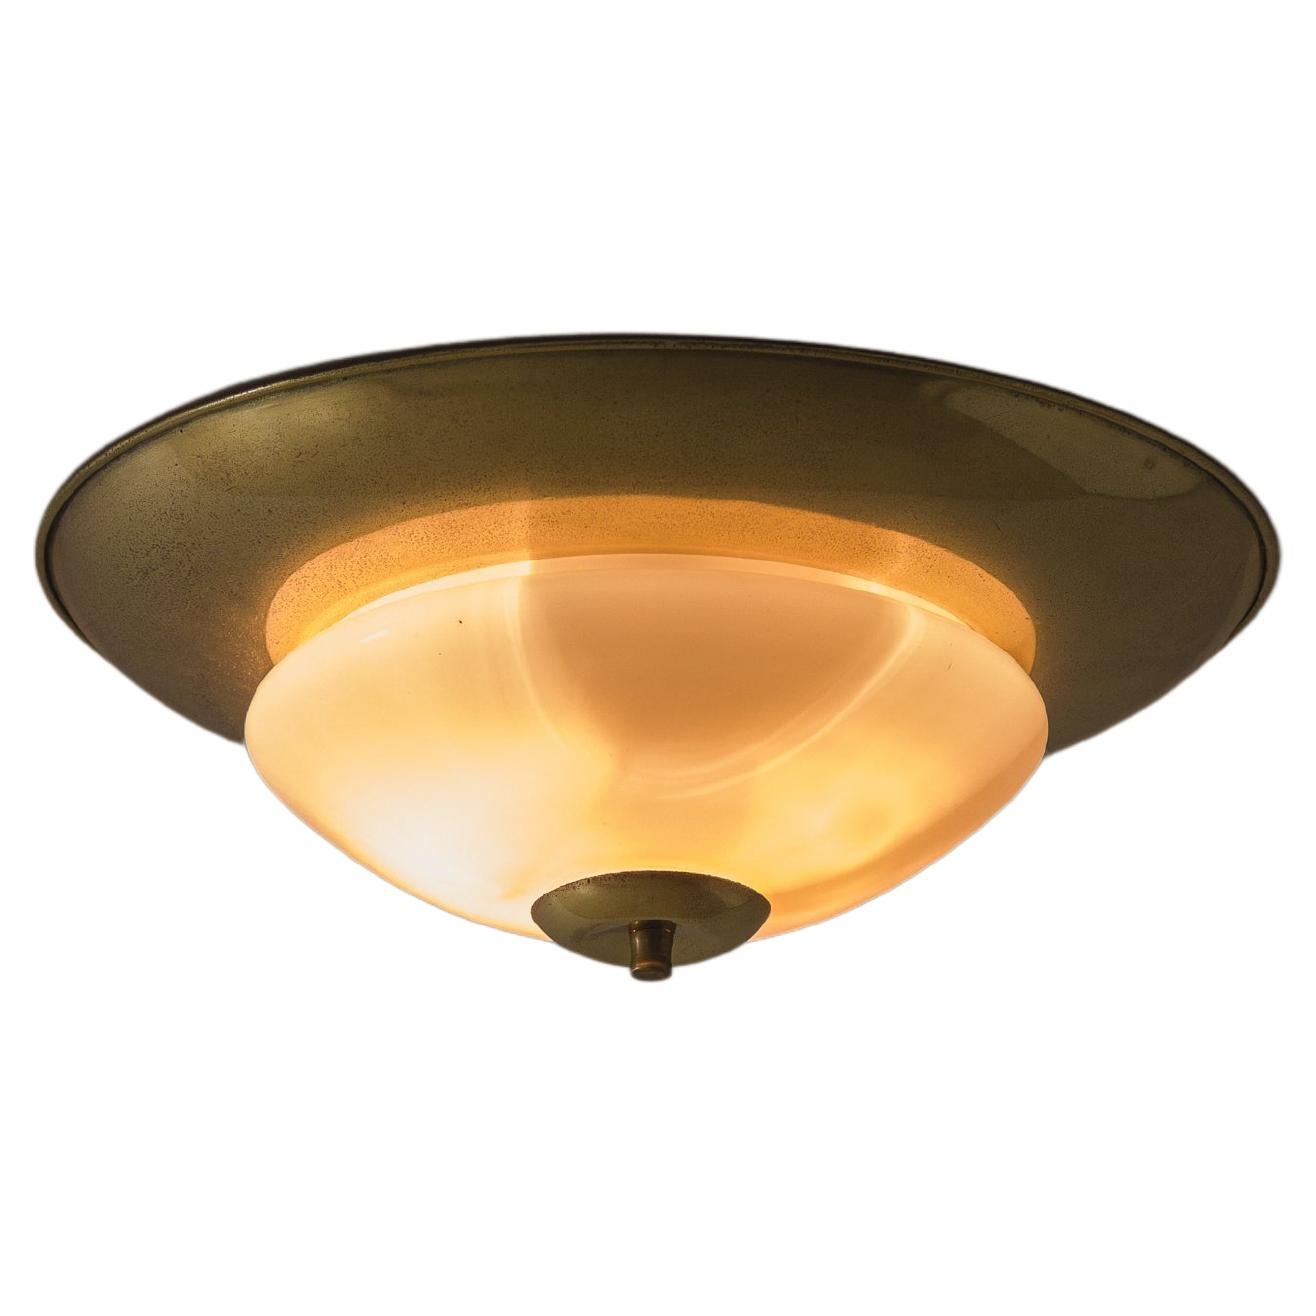 Vintage Midcentury Ceiling Lamp, Brass and Opaline Glass, Brazilian Design, 1960